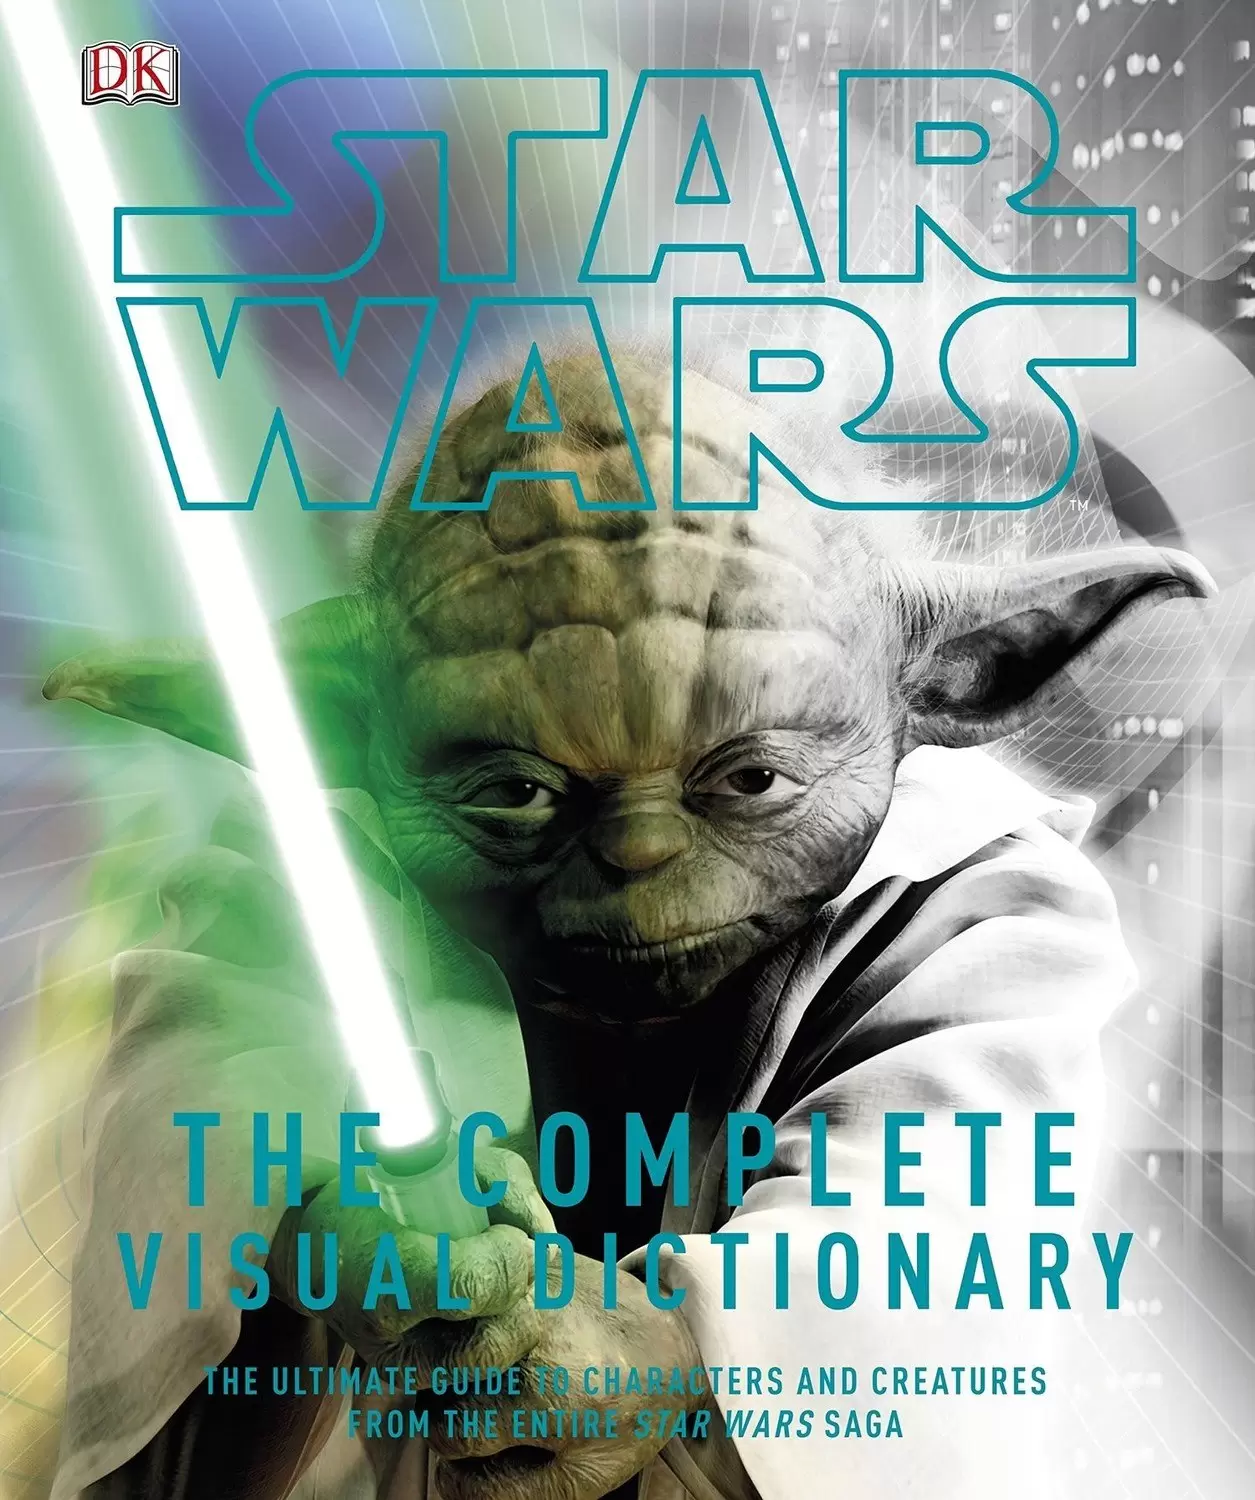 Beaux livres Star Wars - Star Wars - The Complete Visual Dictionary